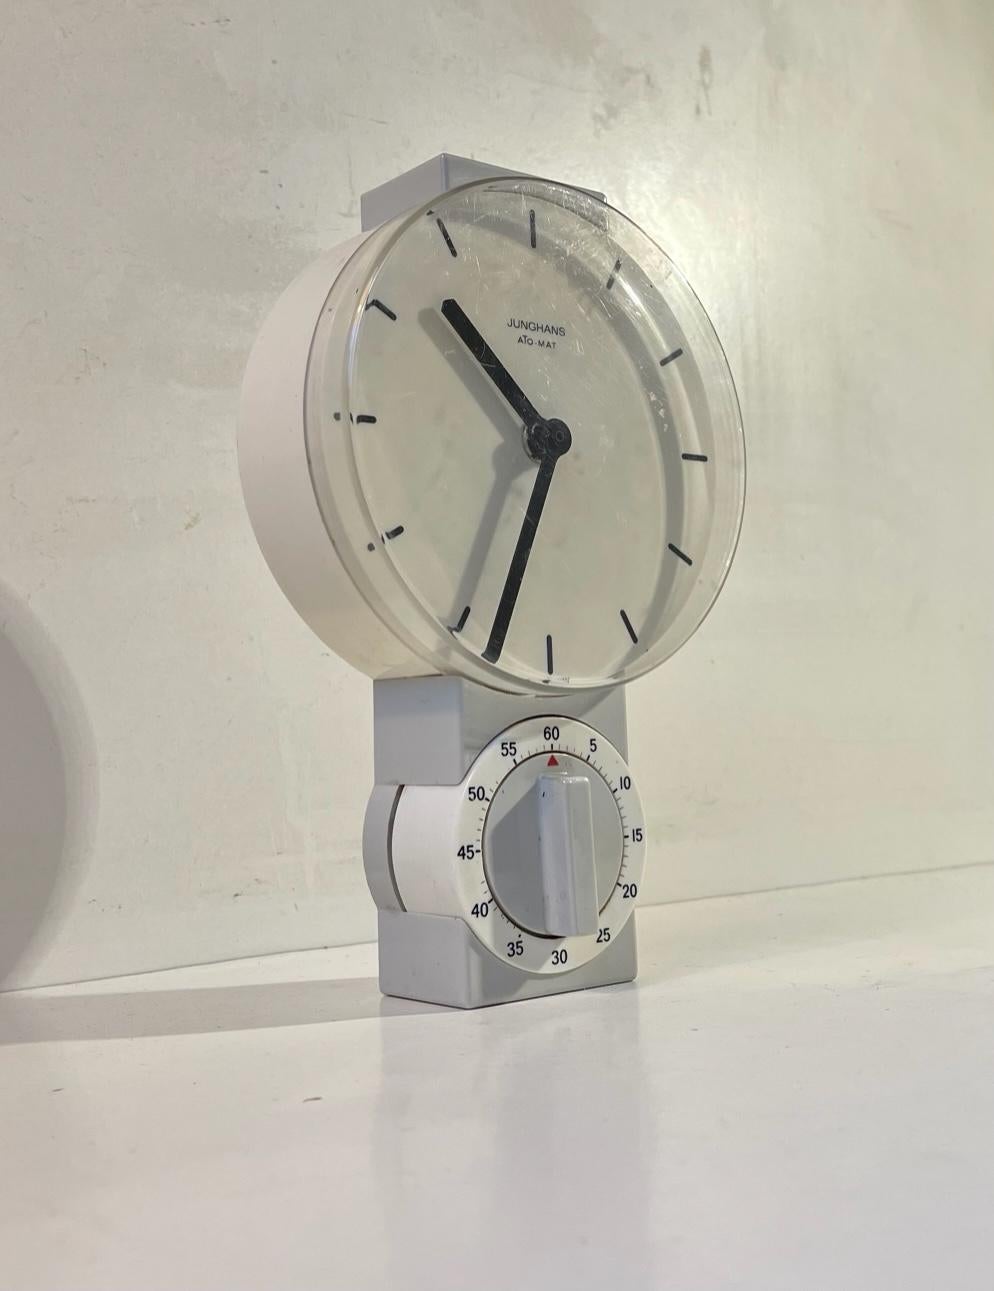 Graphically looking kitchen watch with removable egg clock by Junghans. It is called Ato-Mat and was manufactured during the 1960s or 1970s. It has a quartz/batteri operated movement. Measurements: H: 21, D: 13.5 cm.